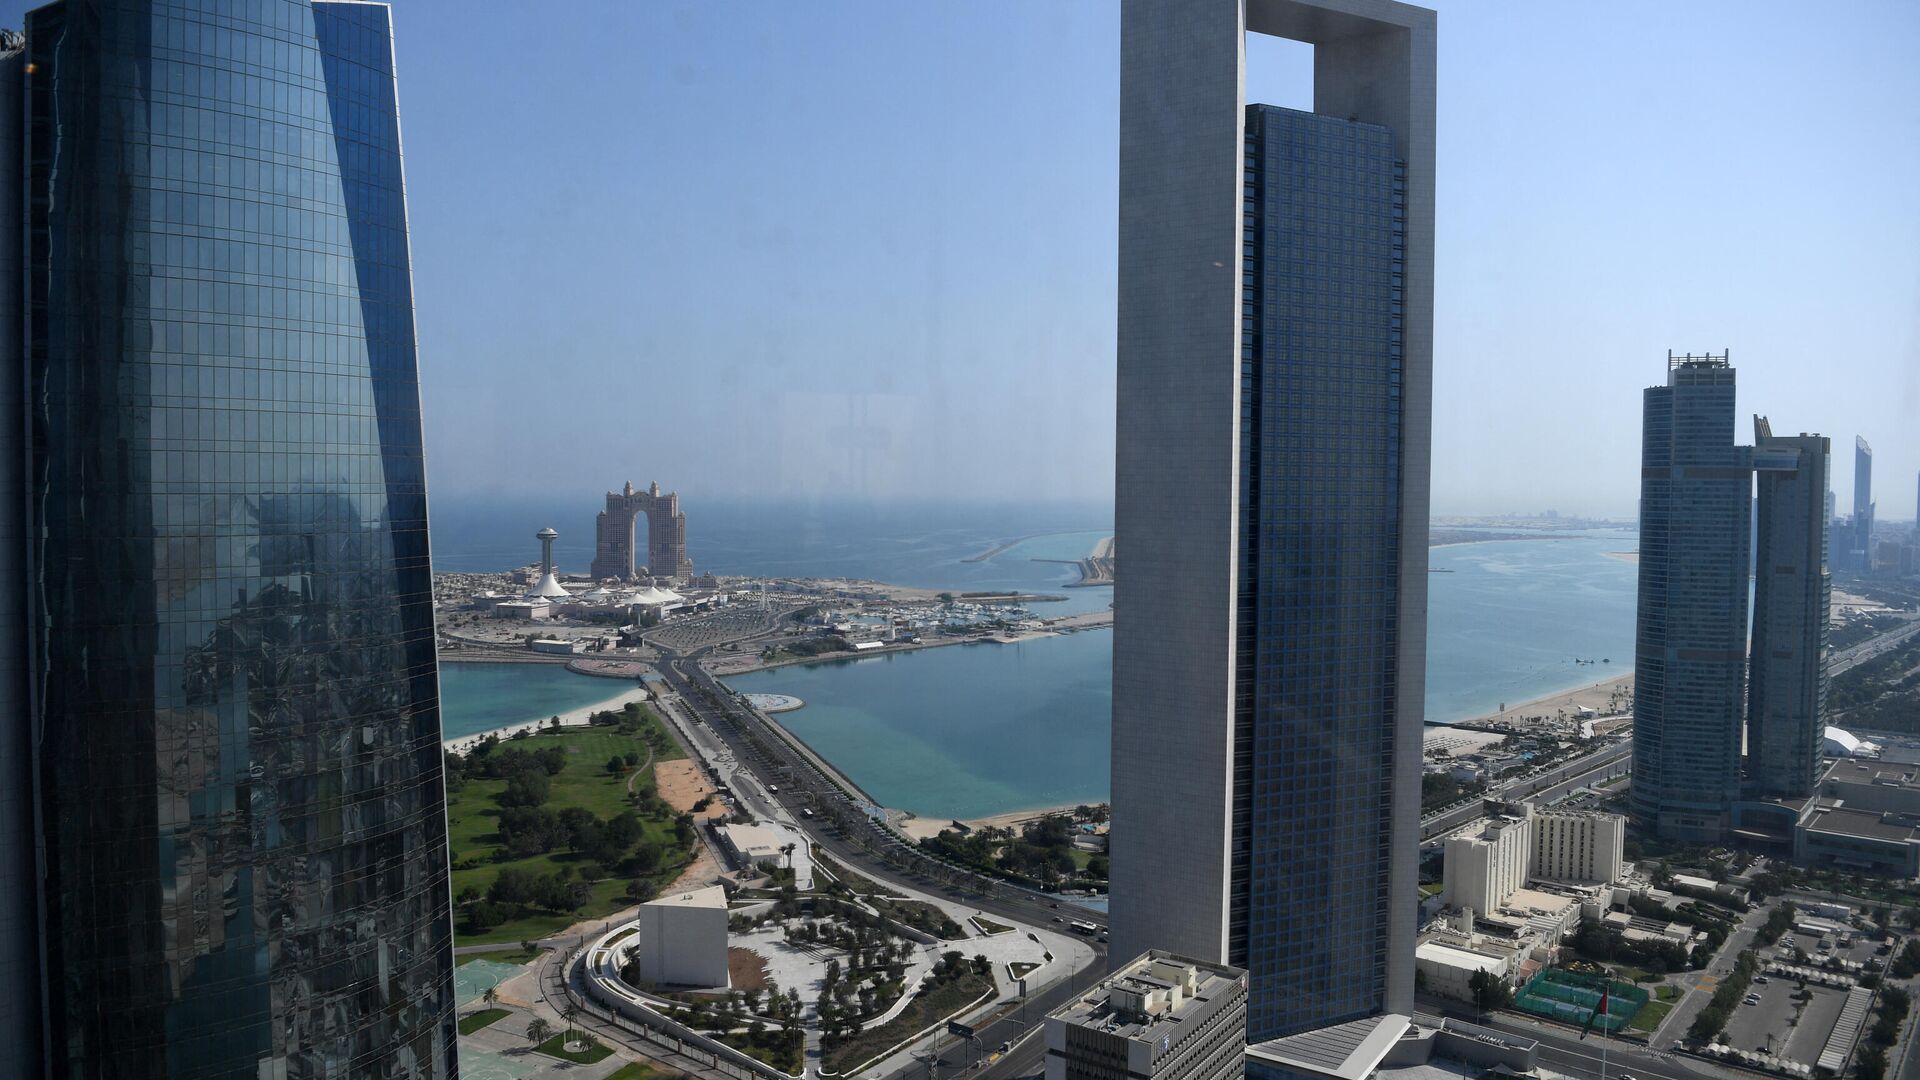 A general view shows the sea front promenade in the Emirati capital Abu Dhabi with the ADNOC headquarters (Abu Dhabi National Oil Company) office complex (C) in the foreground on May 29, 2019. - Sputnik International, 1920, 17.01.2022